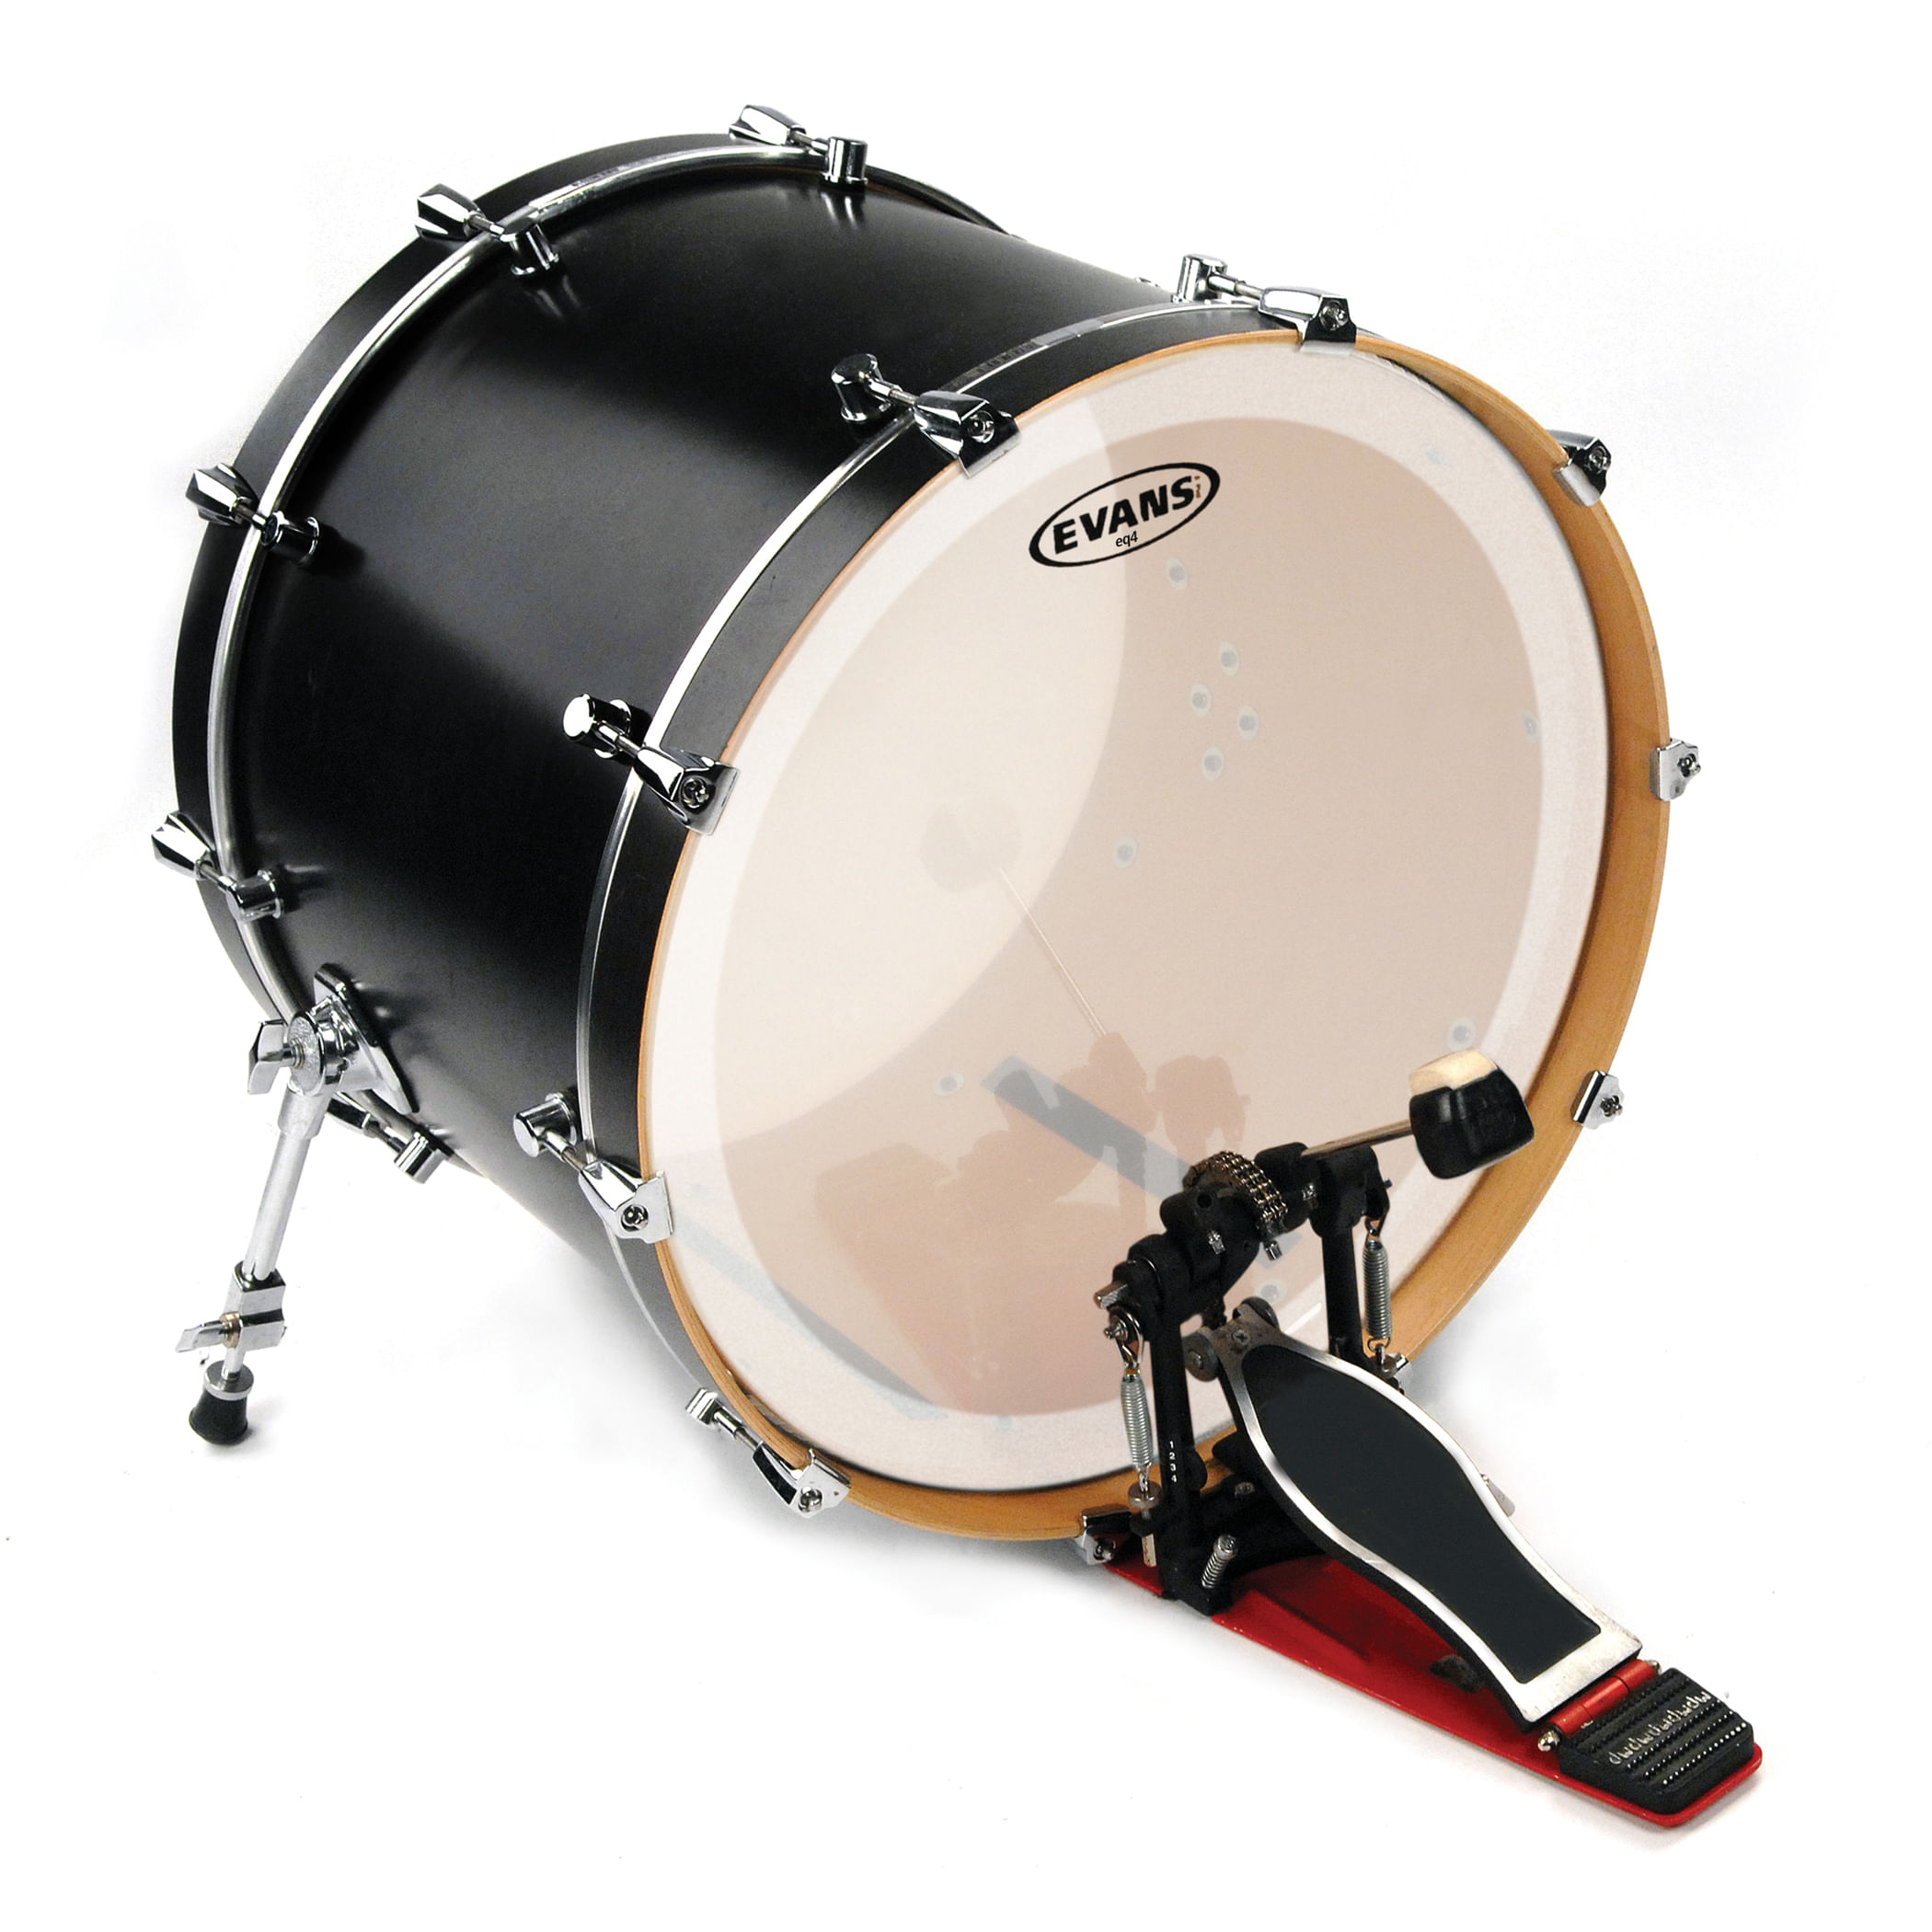 Shop Bass Drumheads - Cosmo Music